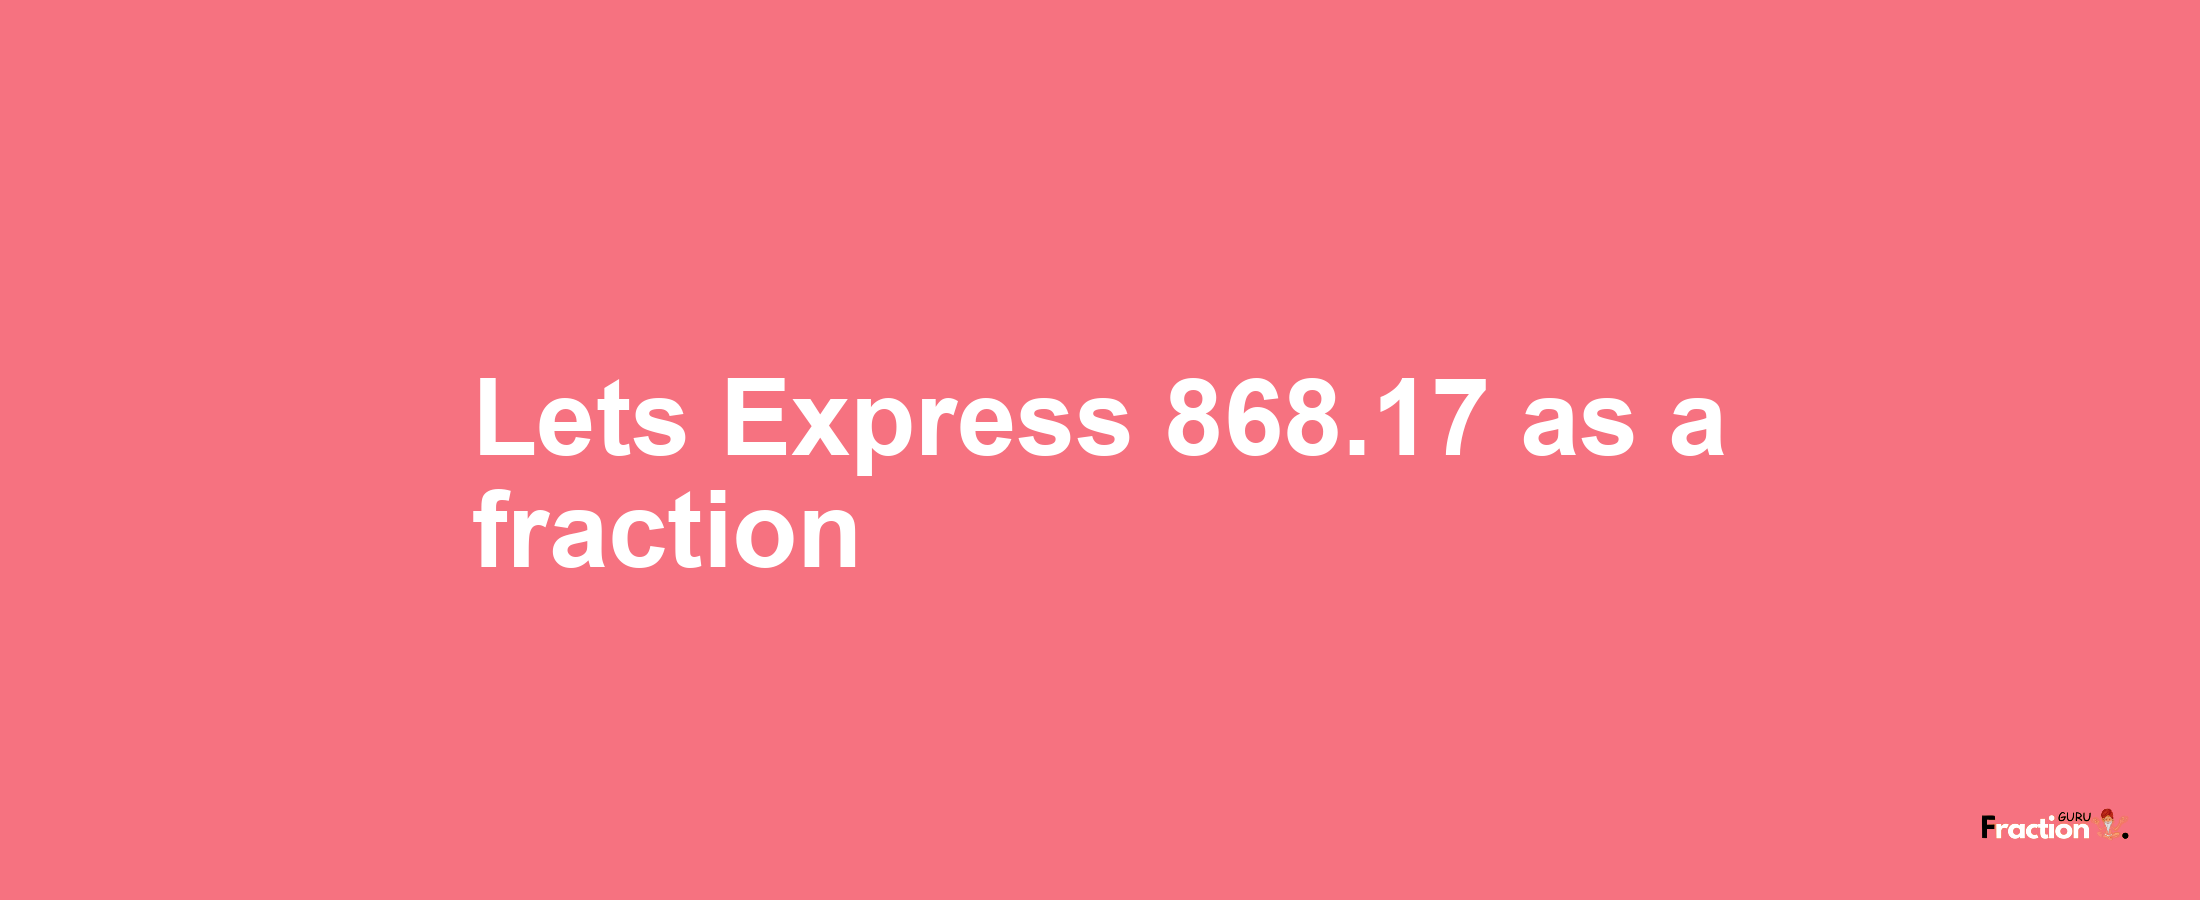 Lets Express 868.17 as afraction